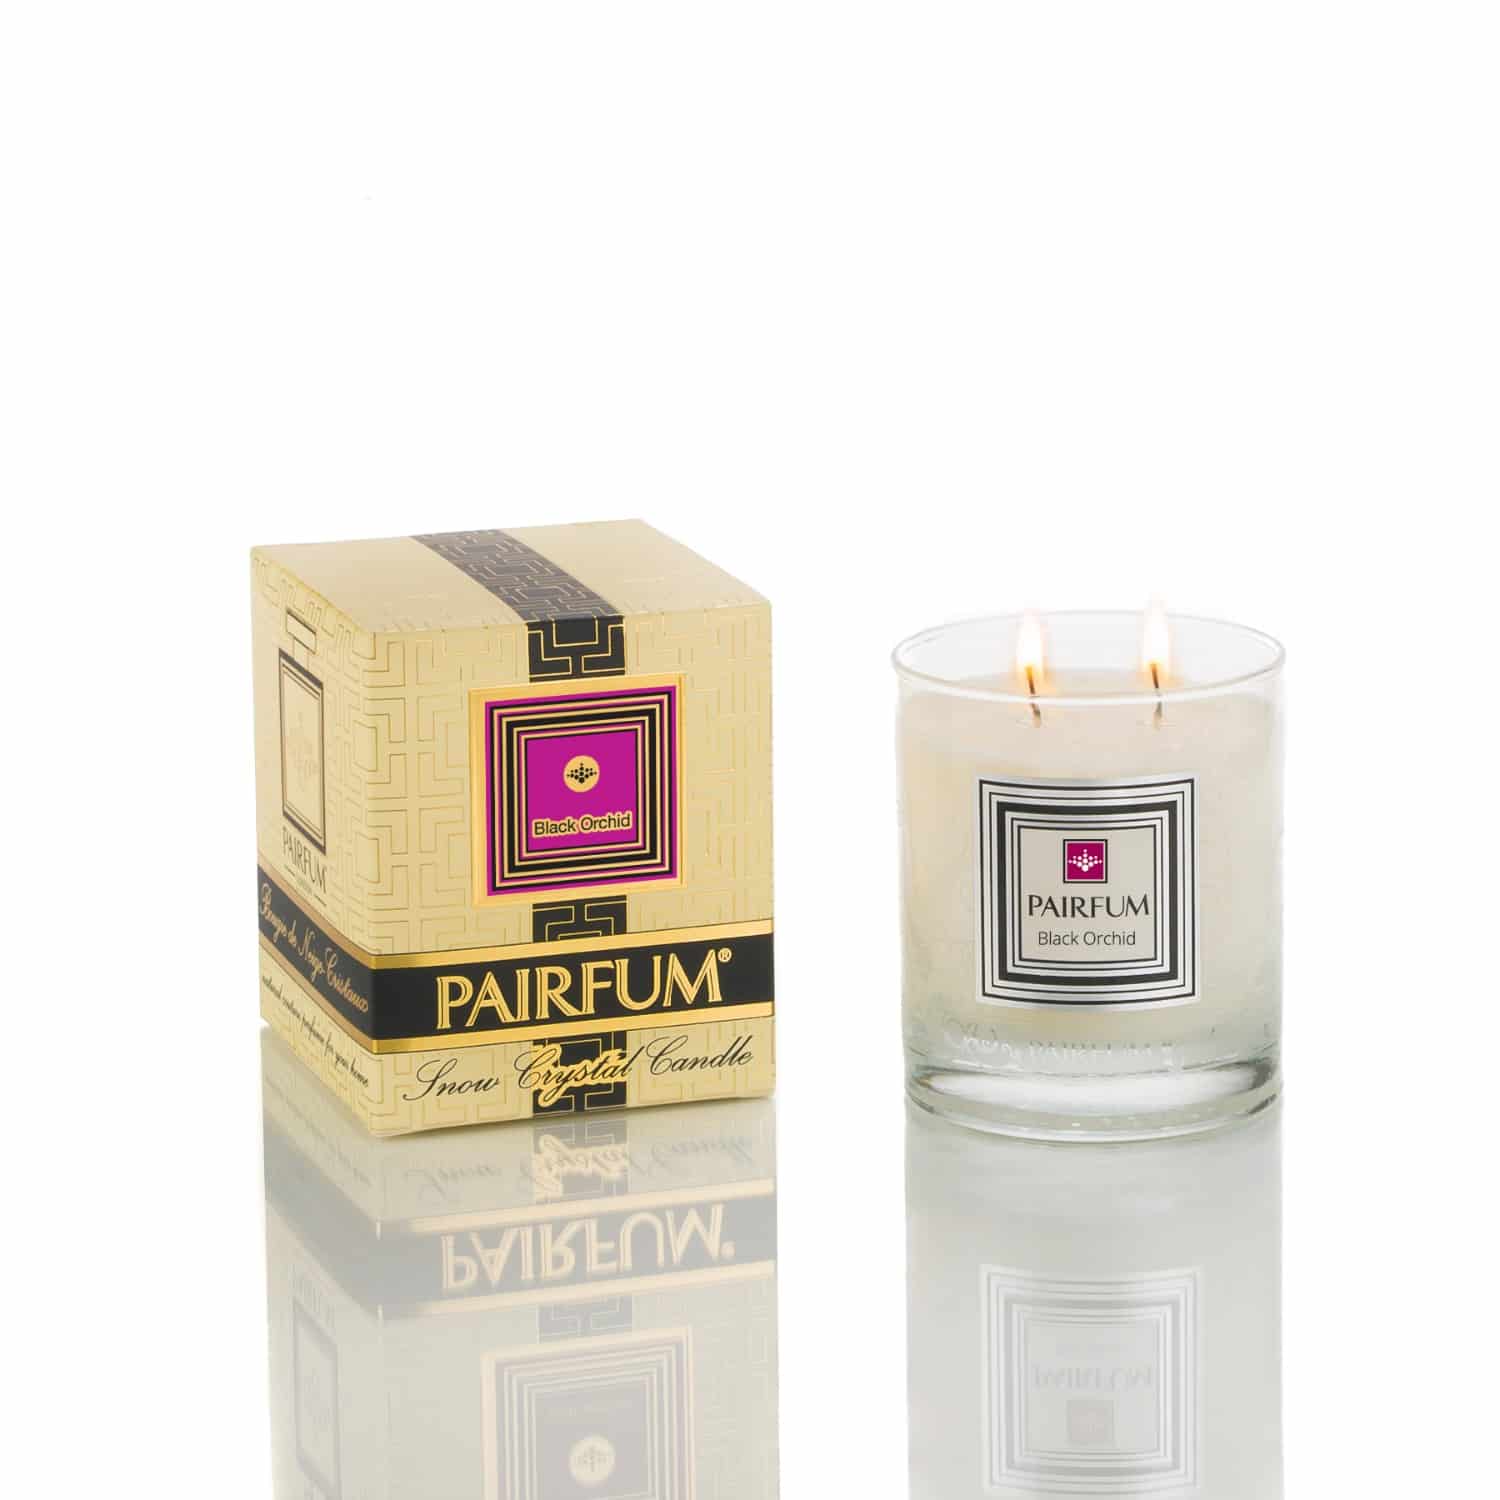 Easter fragrances, Pairfum's aromatic candle.